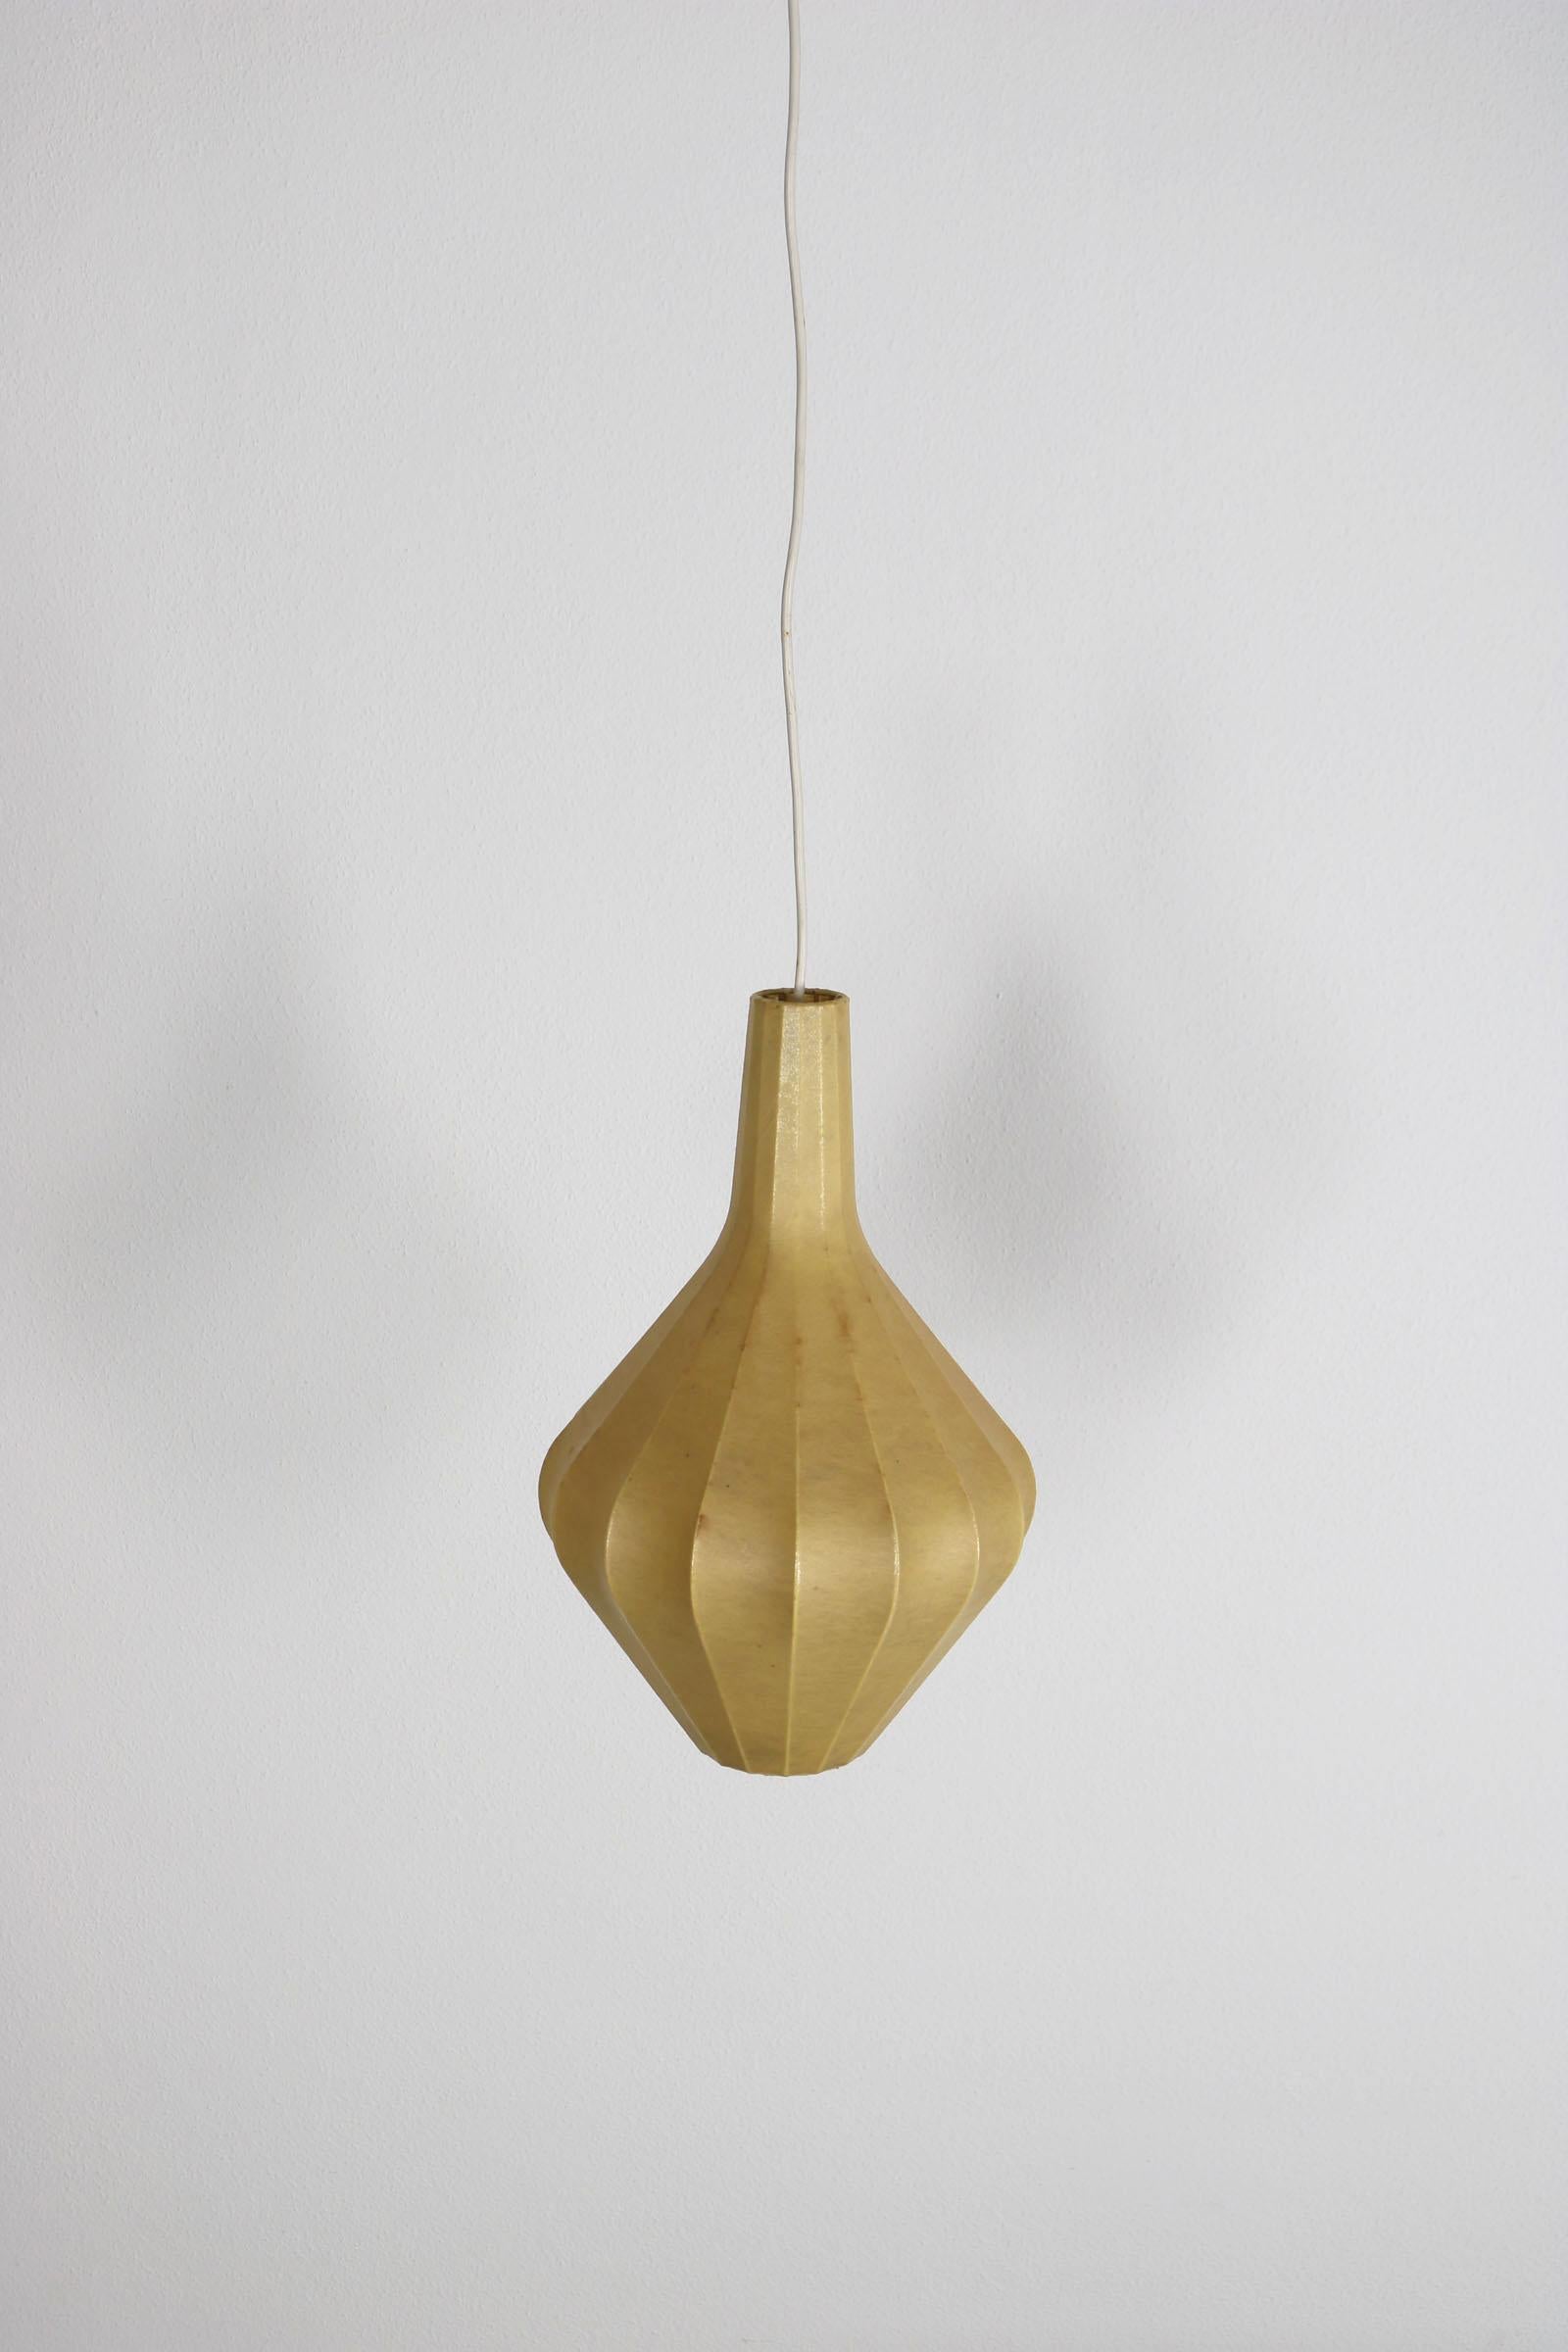 Beautiful pendant lamp Cocoon from the 1950-60s by Friedel Wauer for Cocoon Leuchten International.
Original edition in good condition.
Manufacturer: Goldkant Leuchten Wuppertal, Germany
Beautiful, soft and bright light. The technical process of the